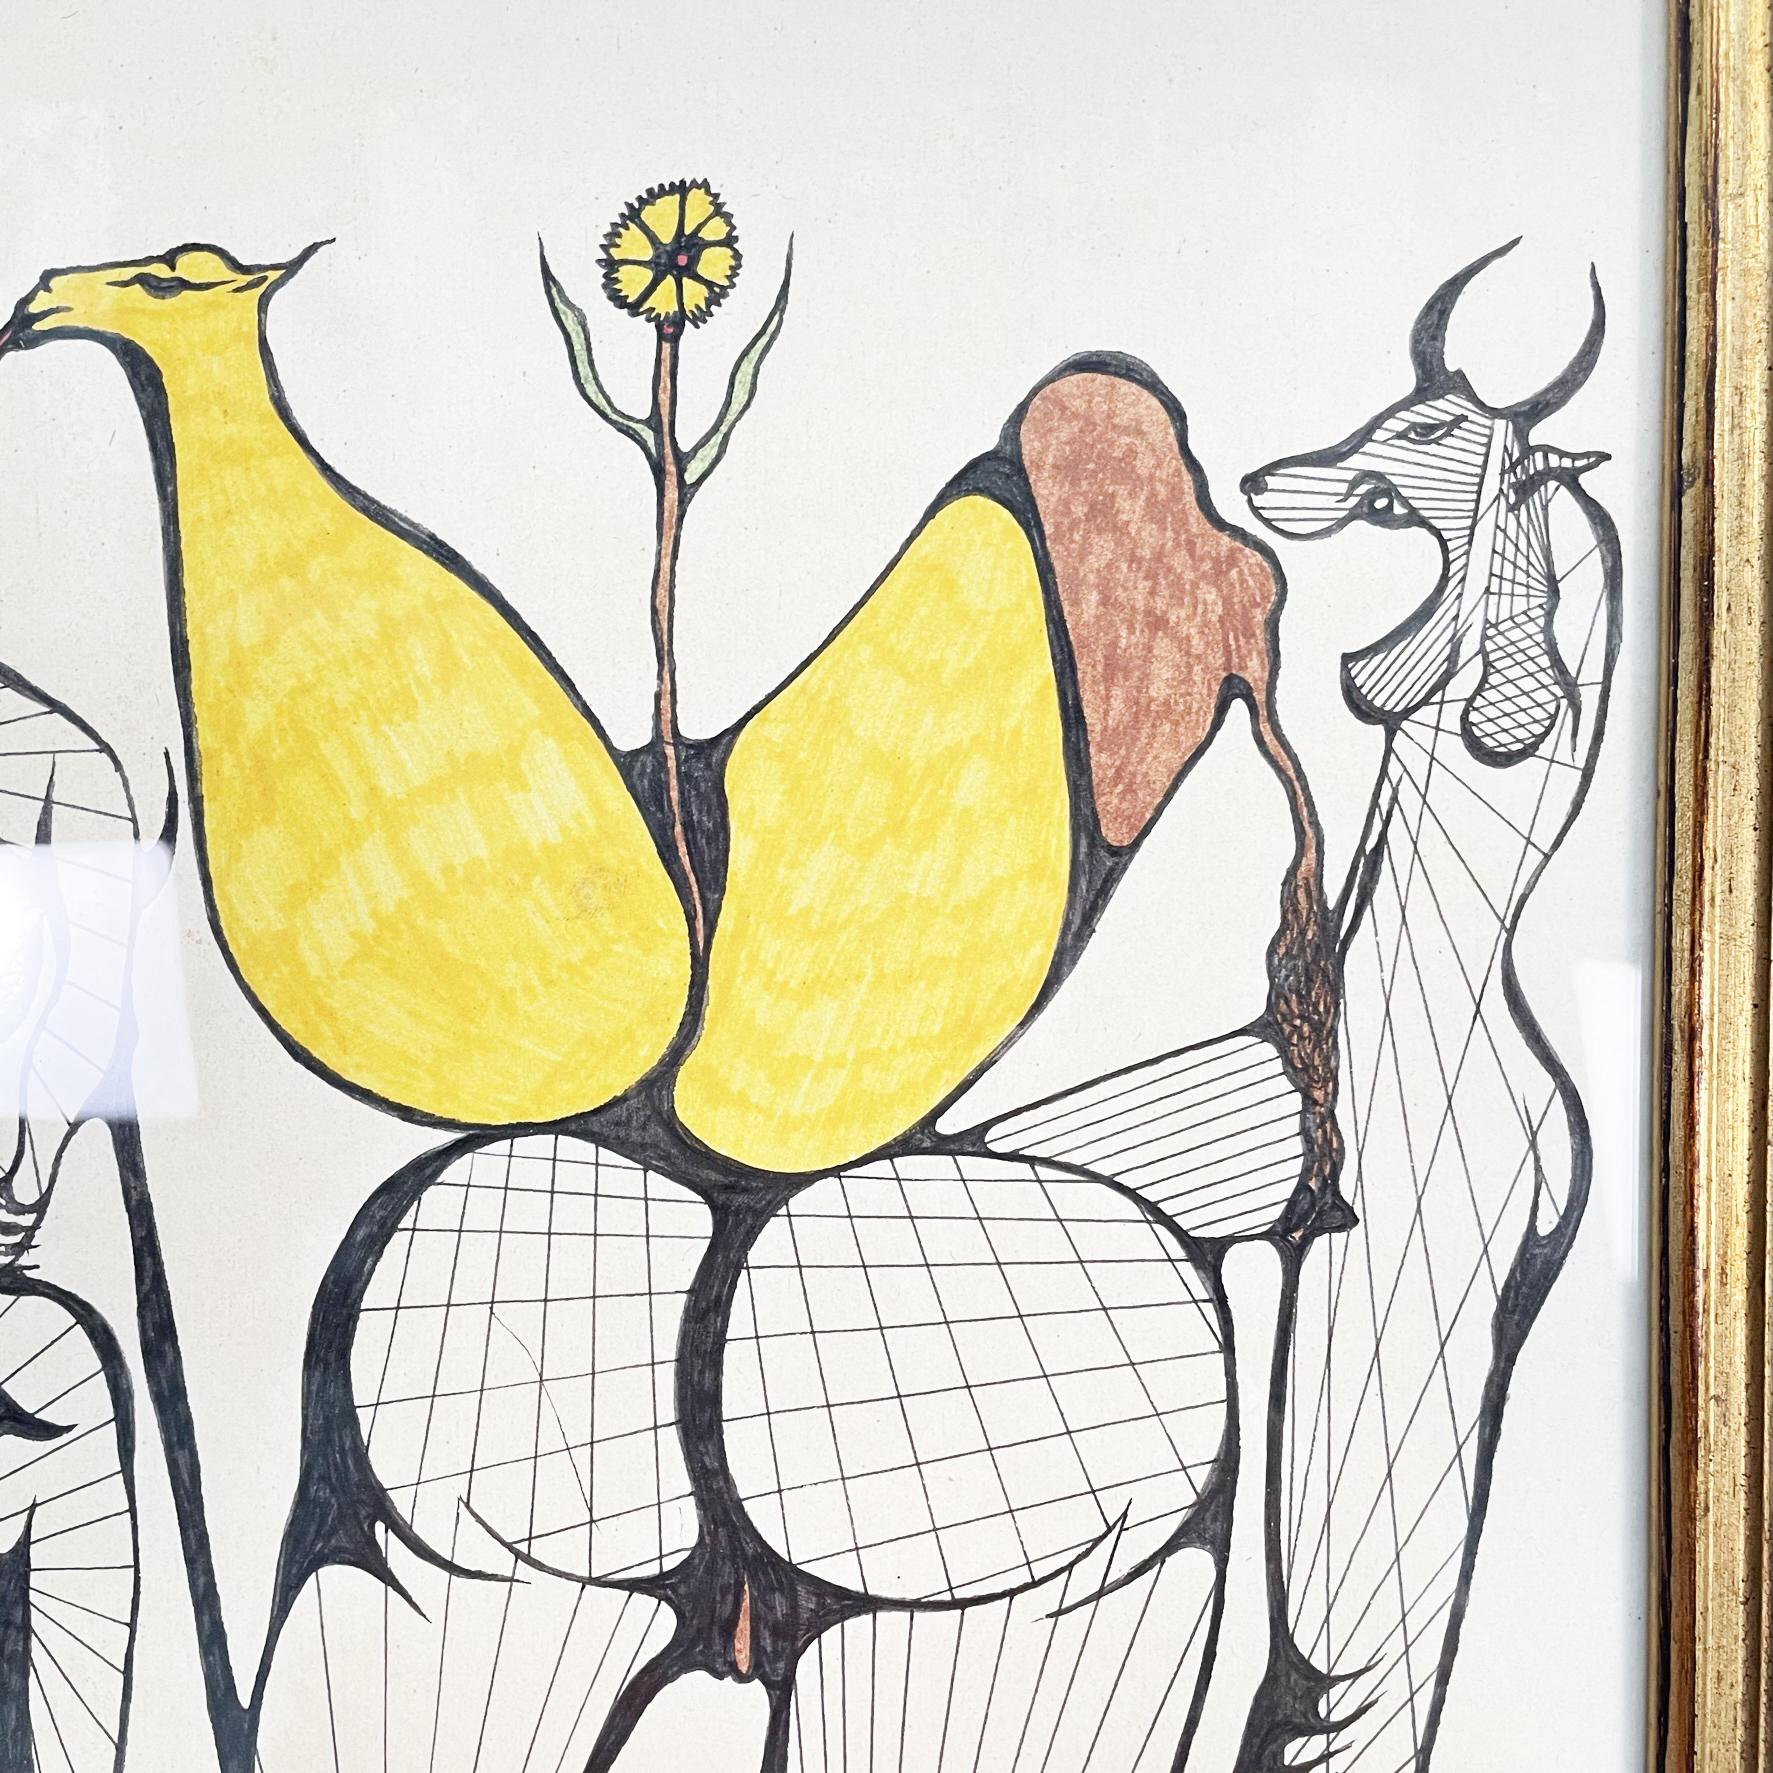 Italian post-modern Drawing on paper in ink and pantone, 2000s
Drawing on paper in ink and yellow and brown pantone, representing figures halfway between human and animal, and a flower in the upper part .This work is inspired by the famous artist